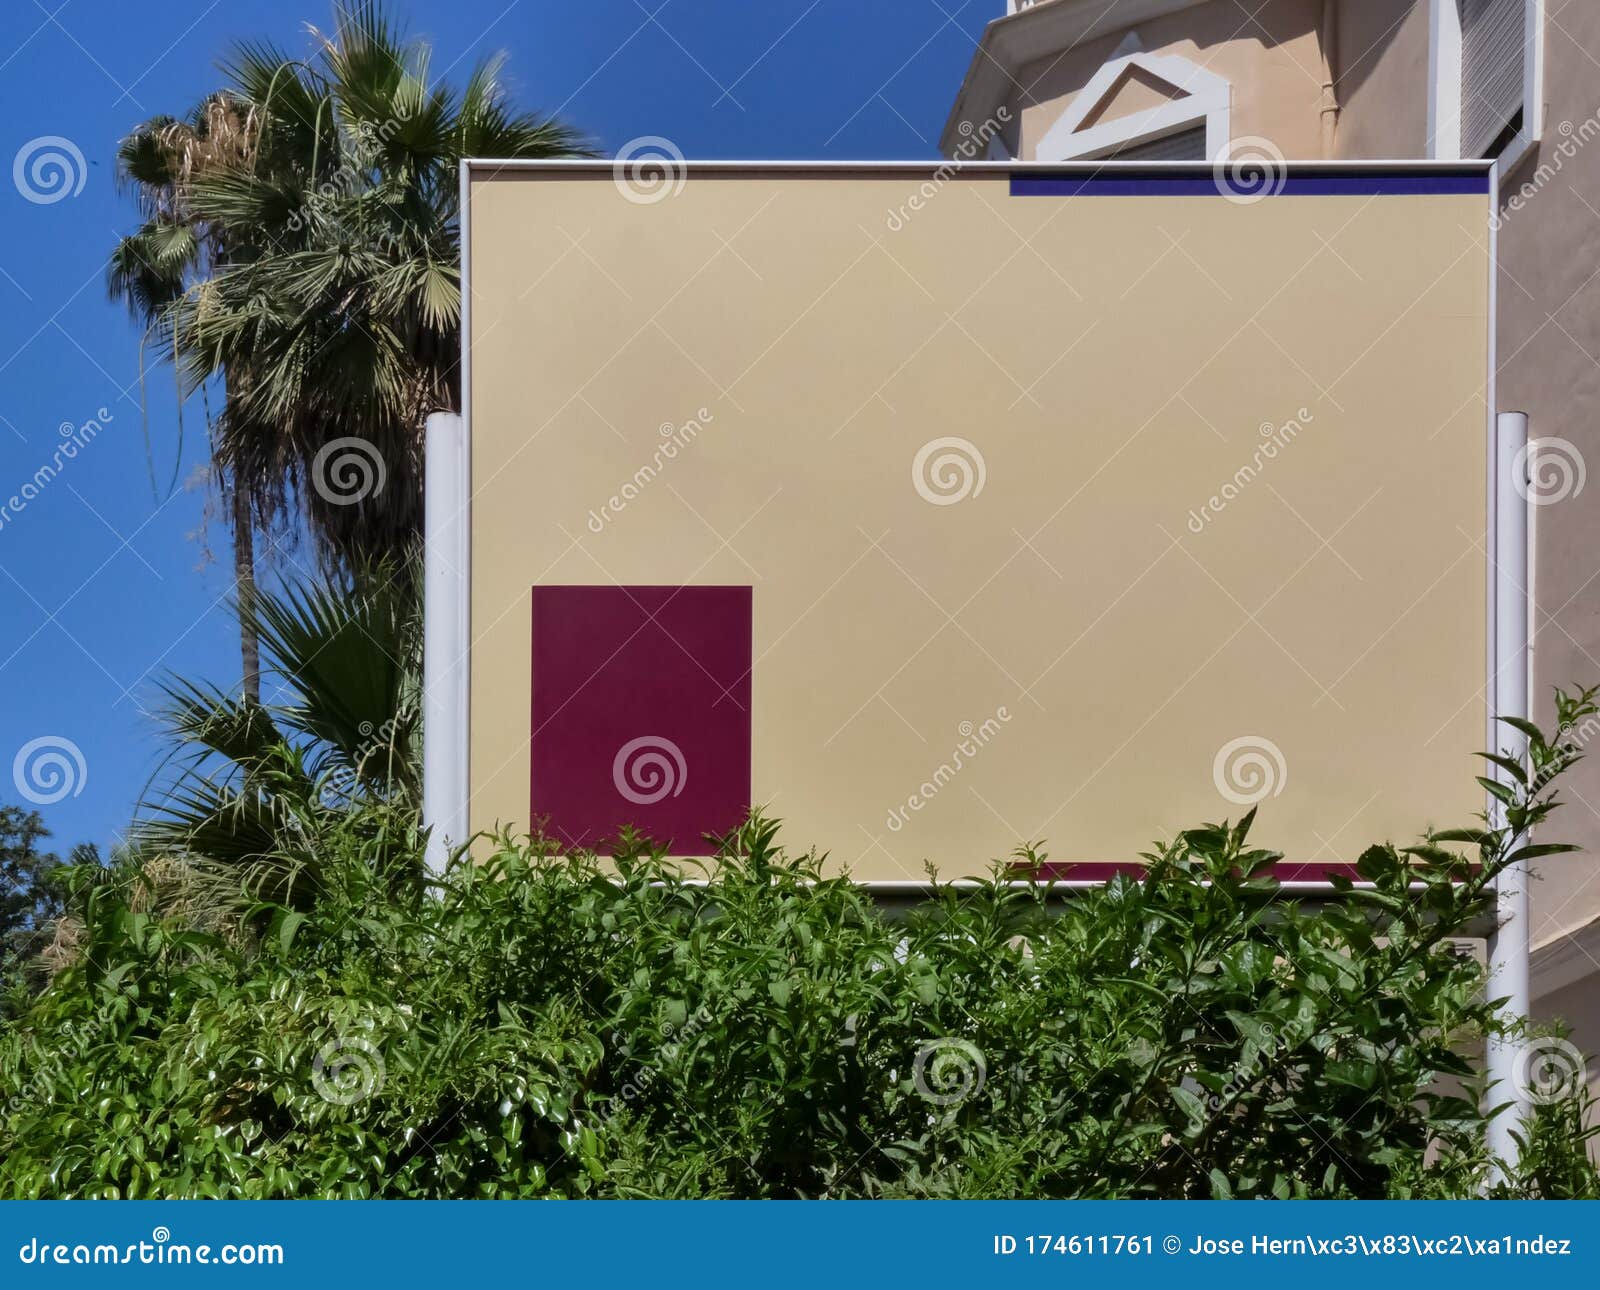 Blank hotel sign stock image. Image of building, architecture - 174611761